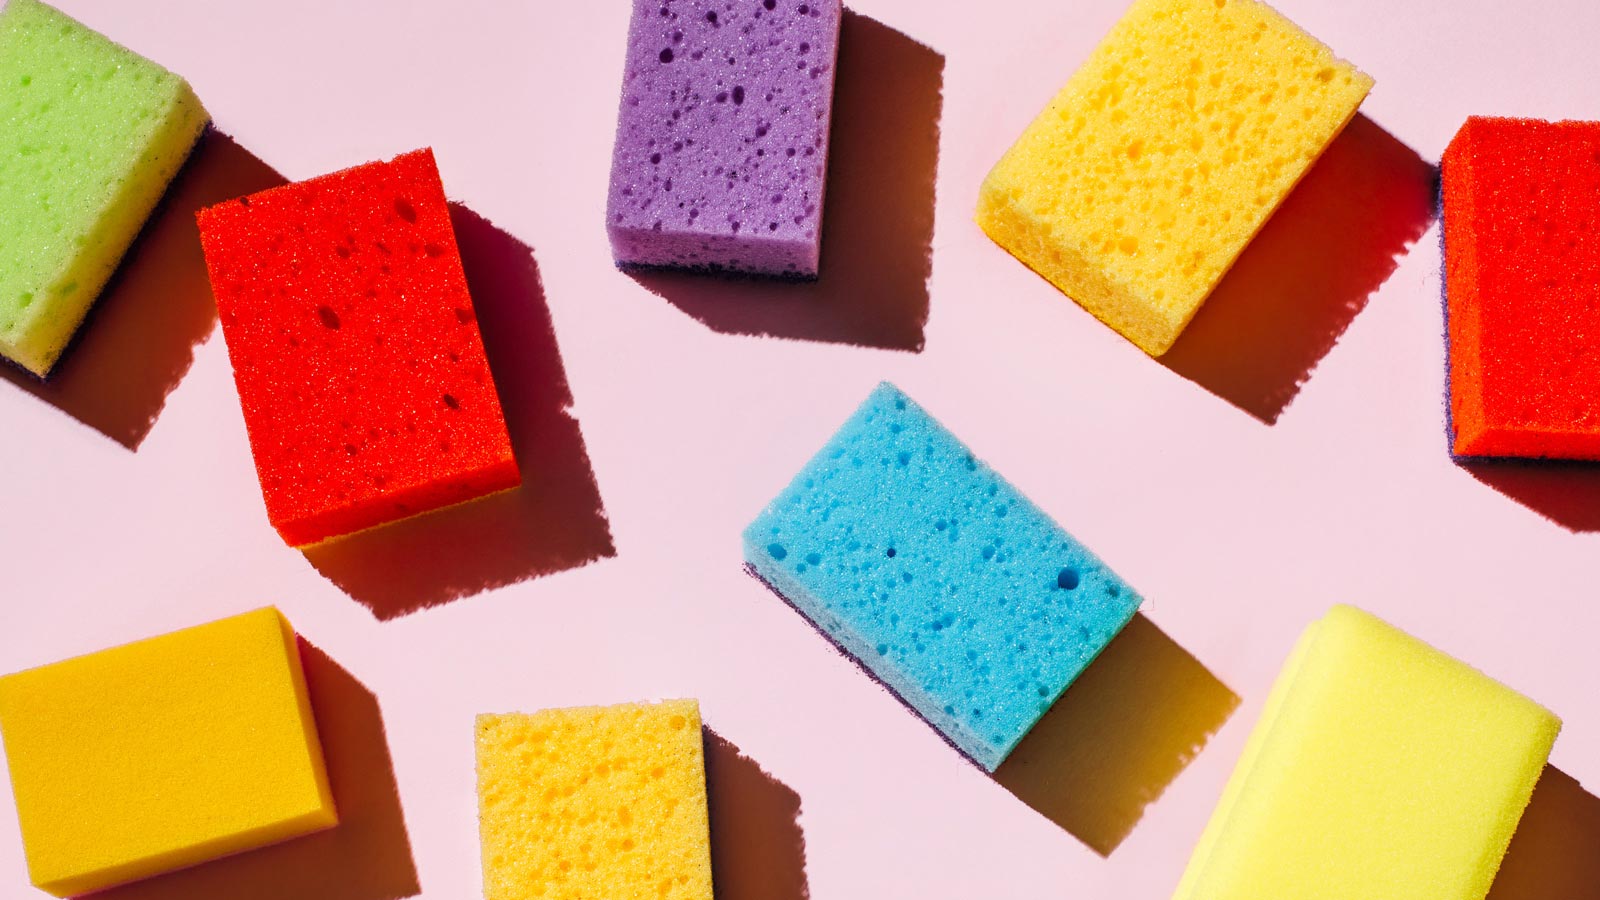 Colored sponges for washing dishes and cleaning on pink background. The concept of cleanliness in the house